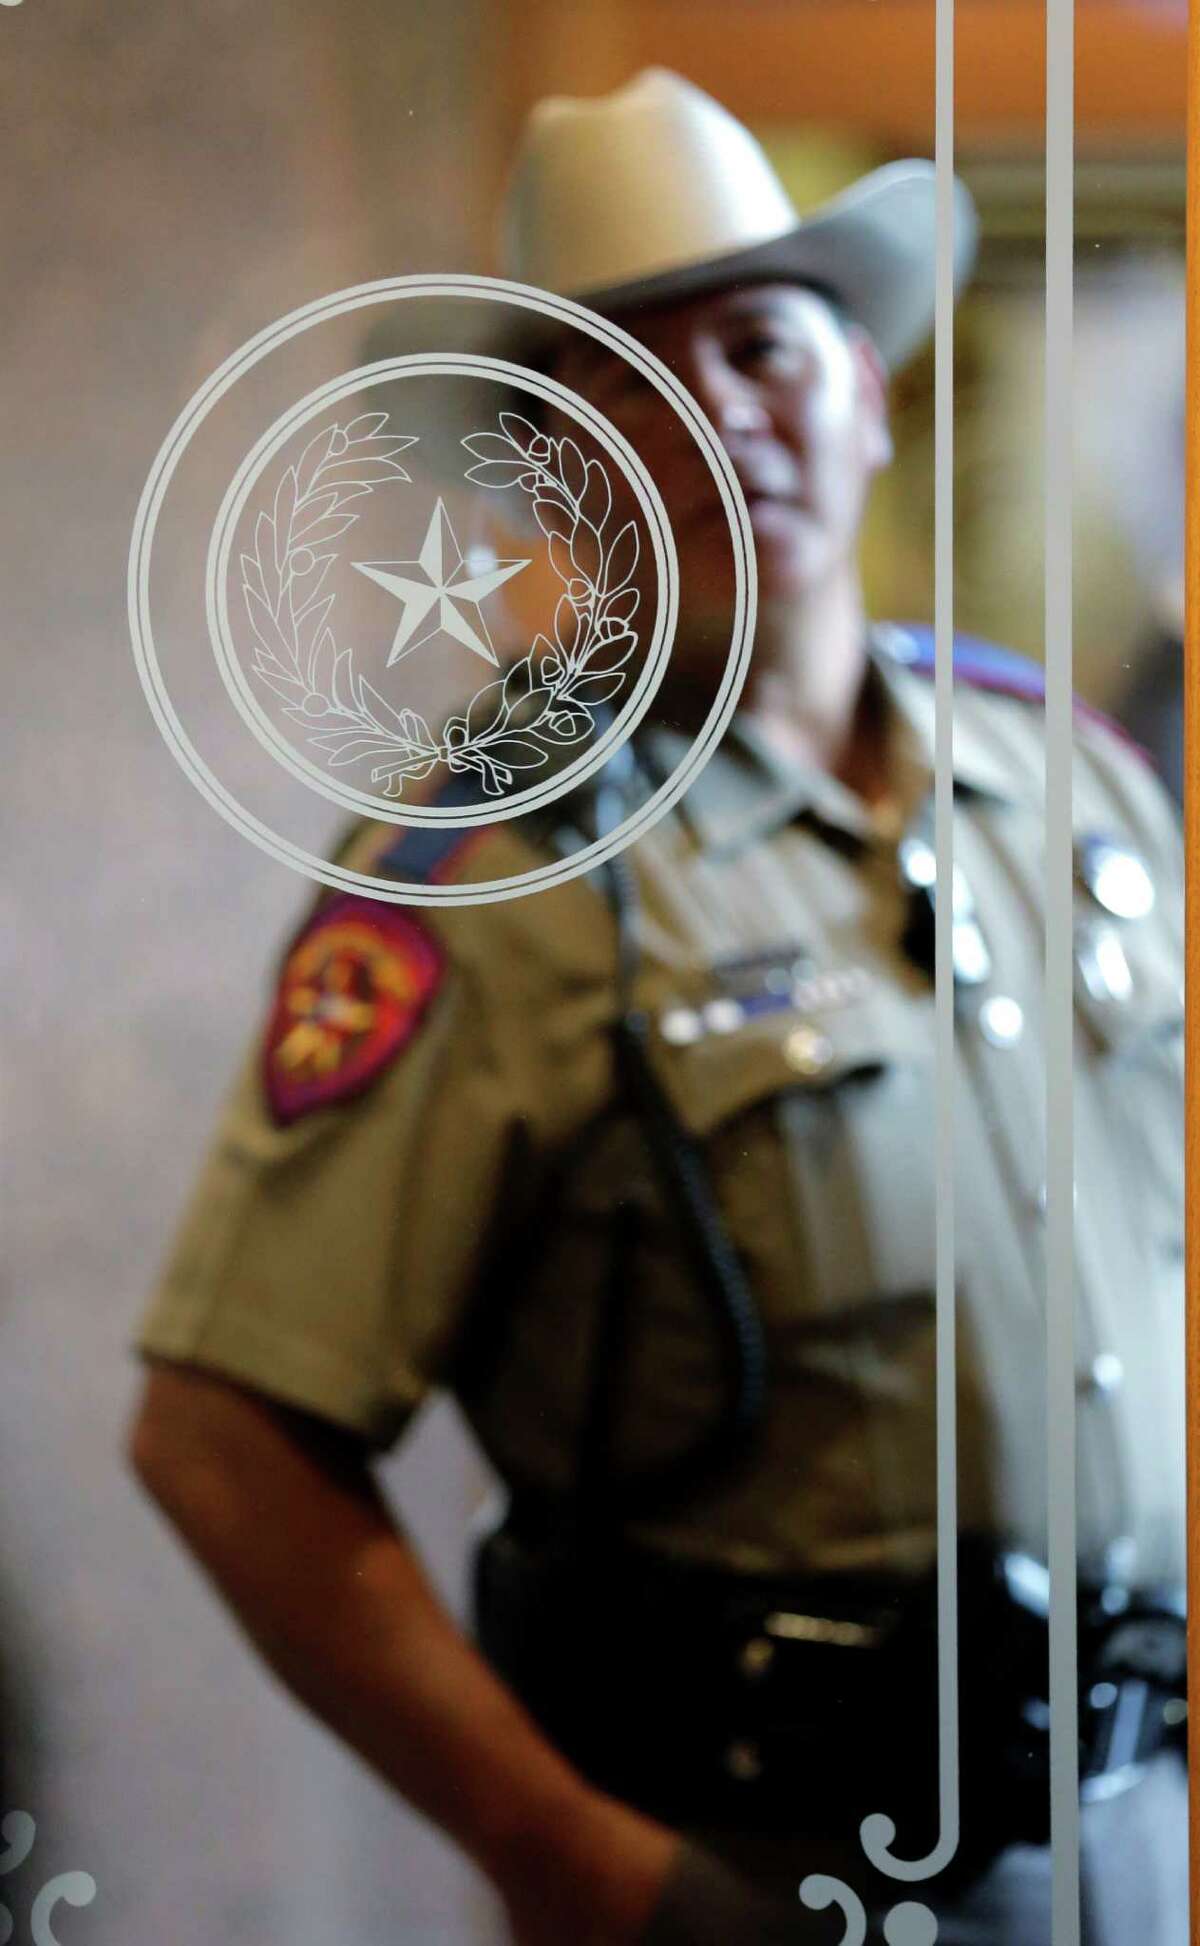 A Texas state trooper stands outside of a hearing where lawmakers discuss whether to legalize concealed handguns on college campuses and open carry everywhere else, Thursday, Feb. 12, 2015, in Austin, Texas. (AP Photo/Eric Gay)